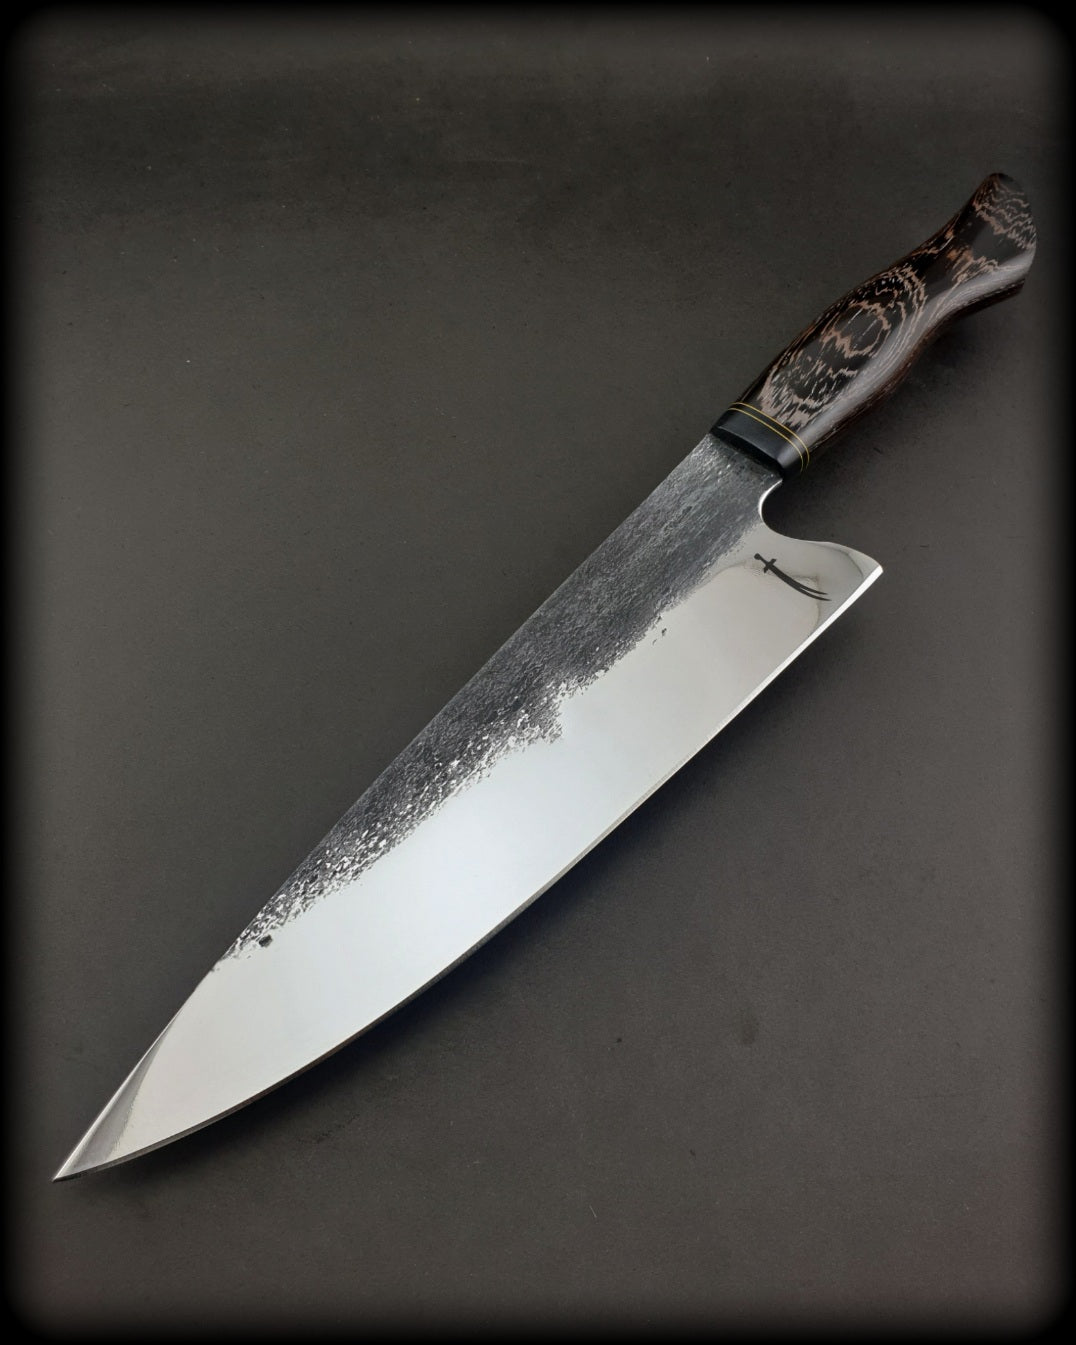 440C Stainless Steel Chefs Knife - Mercantile Mountain